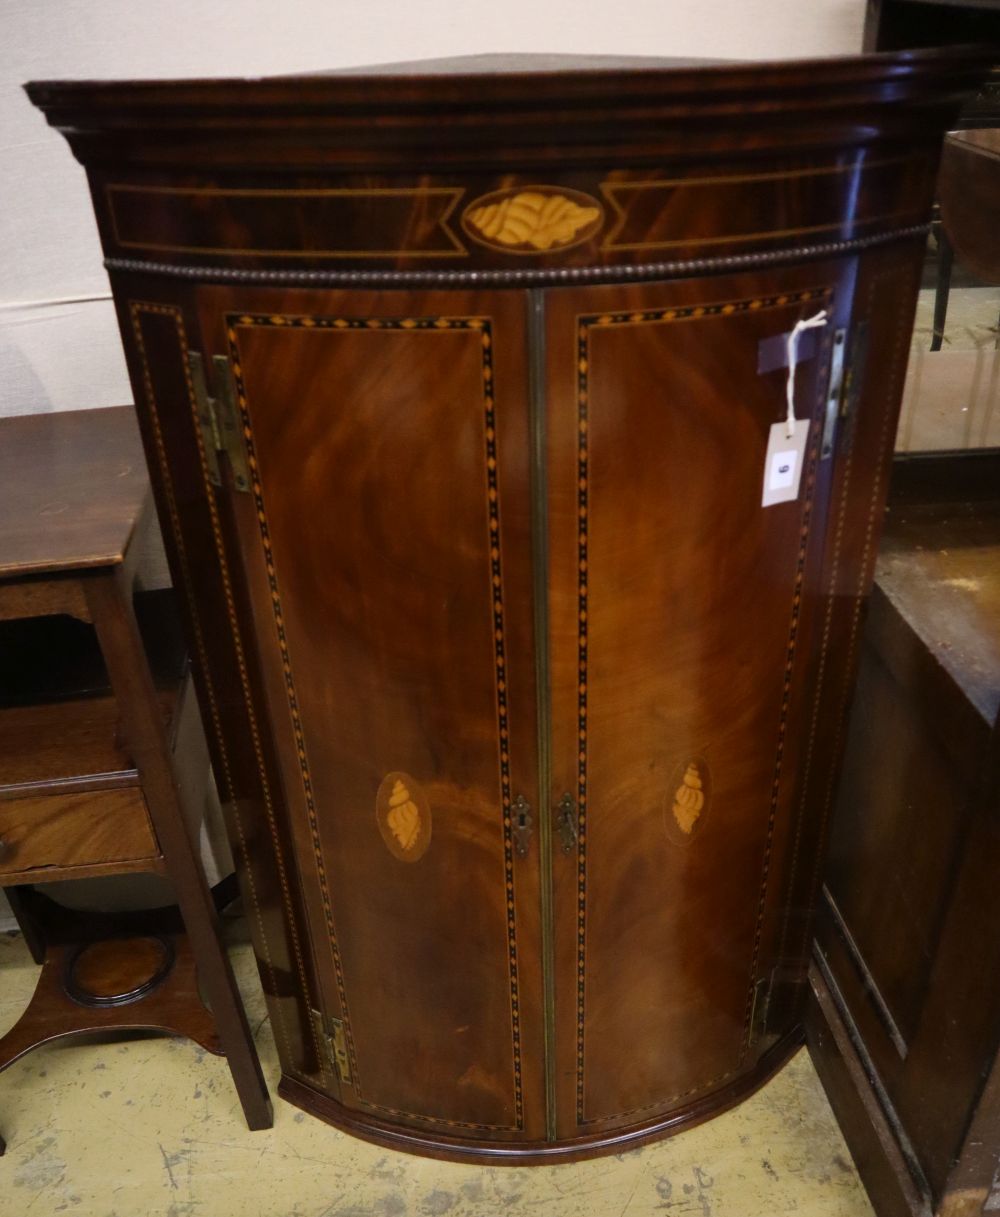 A George III inlaid mahogany bow-fronted hanging corner cupboard, having geometric line and shell